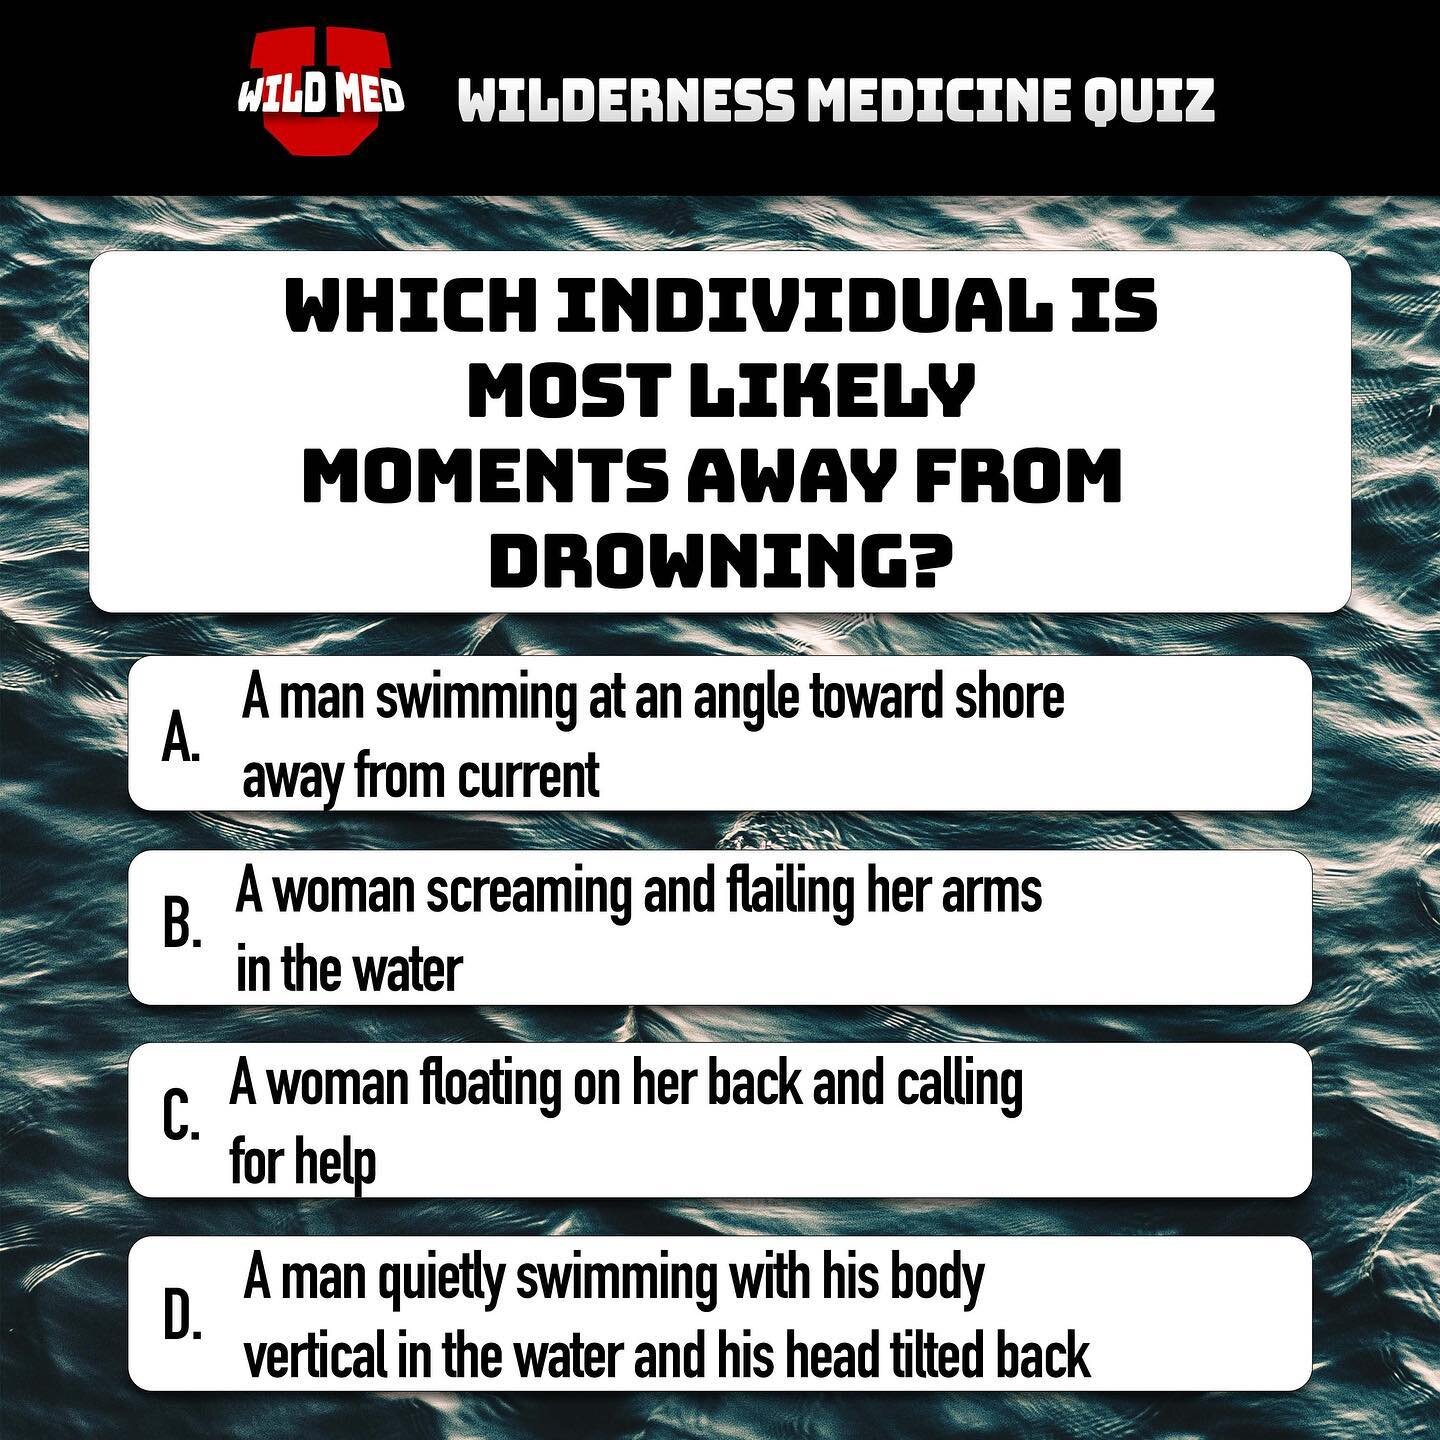 The correct answer is D.
This position is known as the instinctive drowning response and is the final set of reactions in the last 20 to 60 seconds before sinking. Drowning itself is quick and silent, although it may be preceded by distress, which is